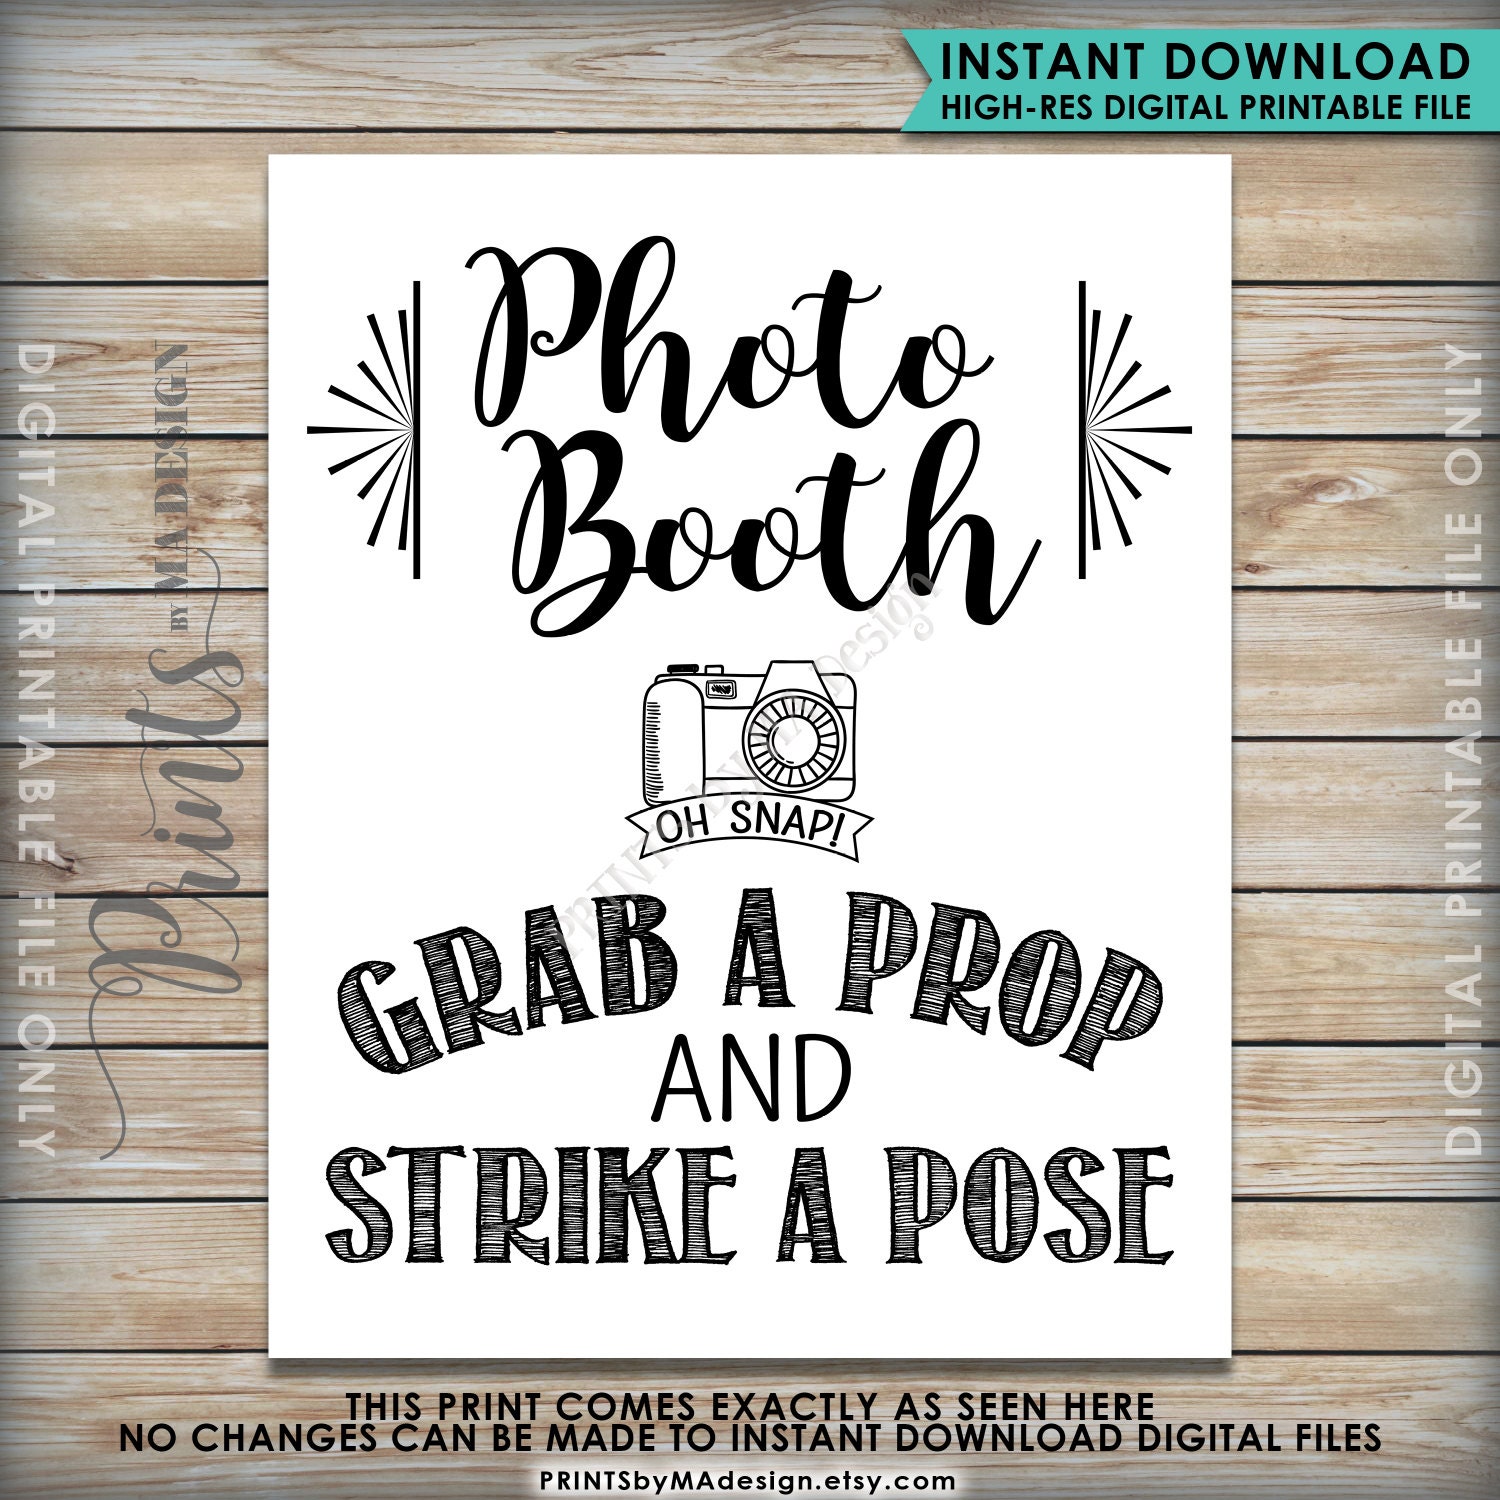 photobooth-sign-grab-a-prop-and-strike-a-pose-photo-booth-sign-selfie-station-wedding-sign